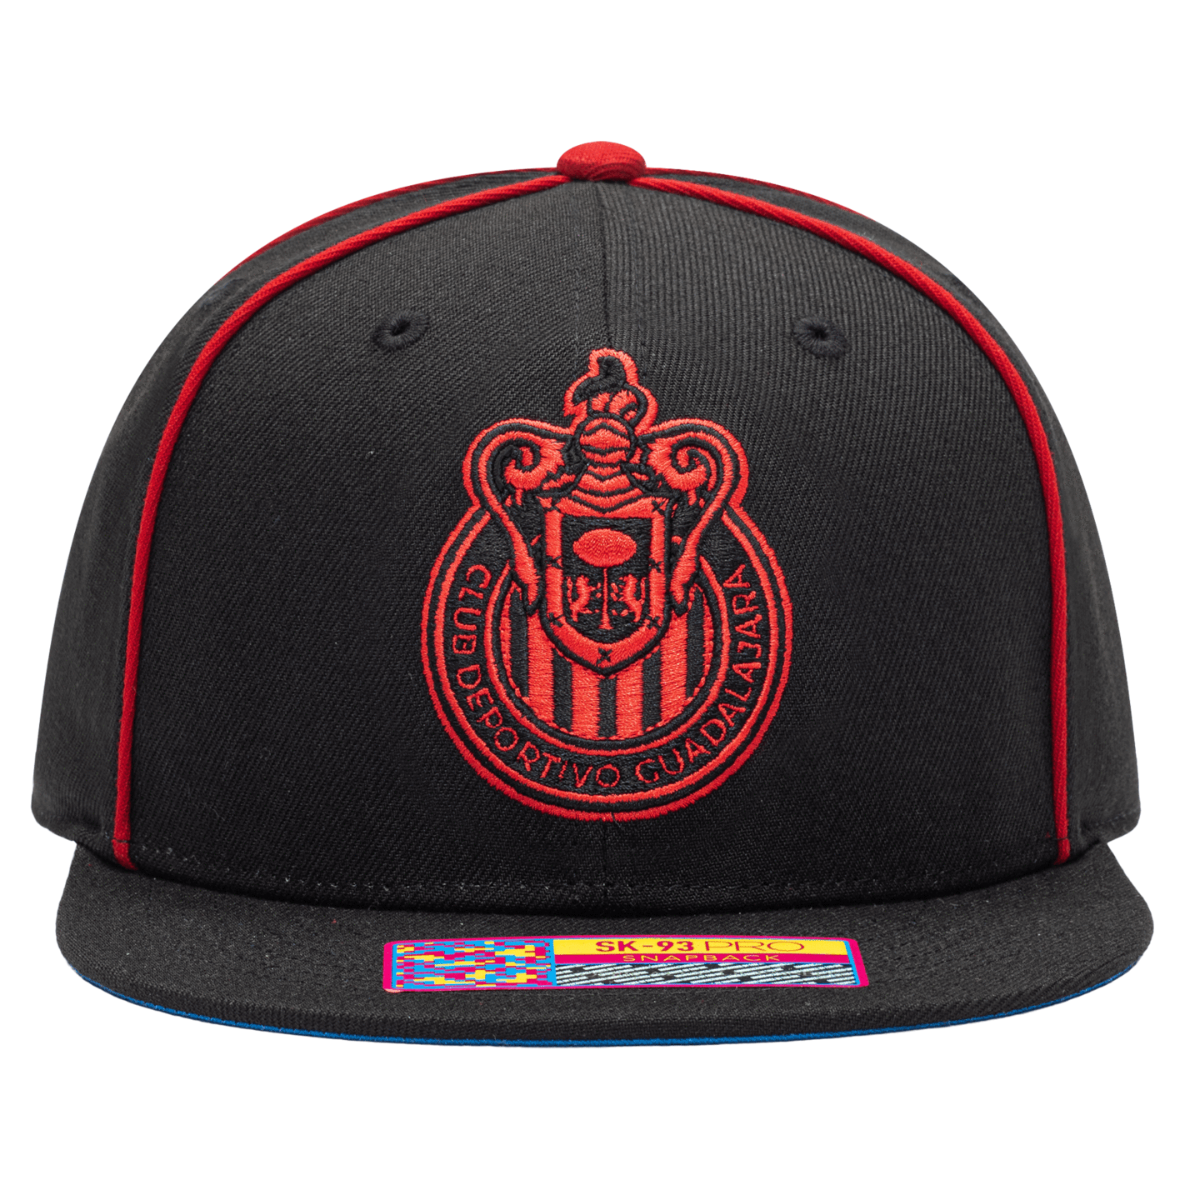 FI Collection Chivas Cali Night Snapback Hat - Black-Red (Front)